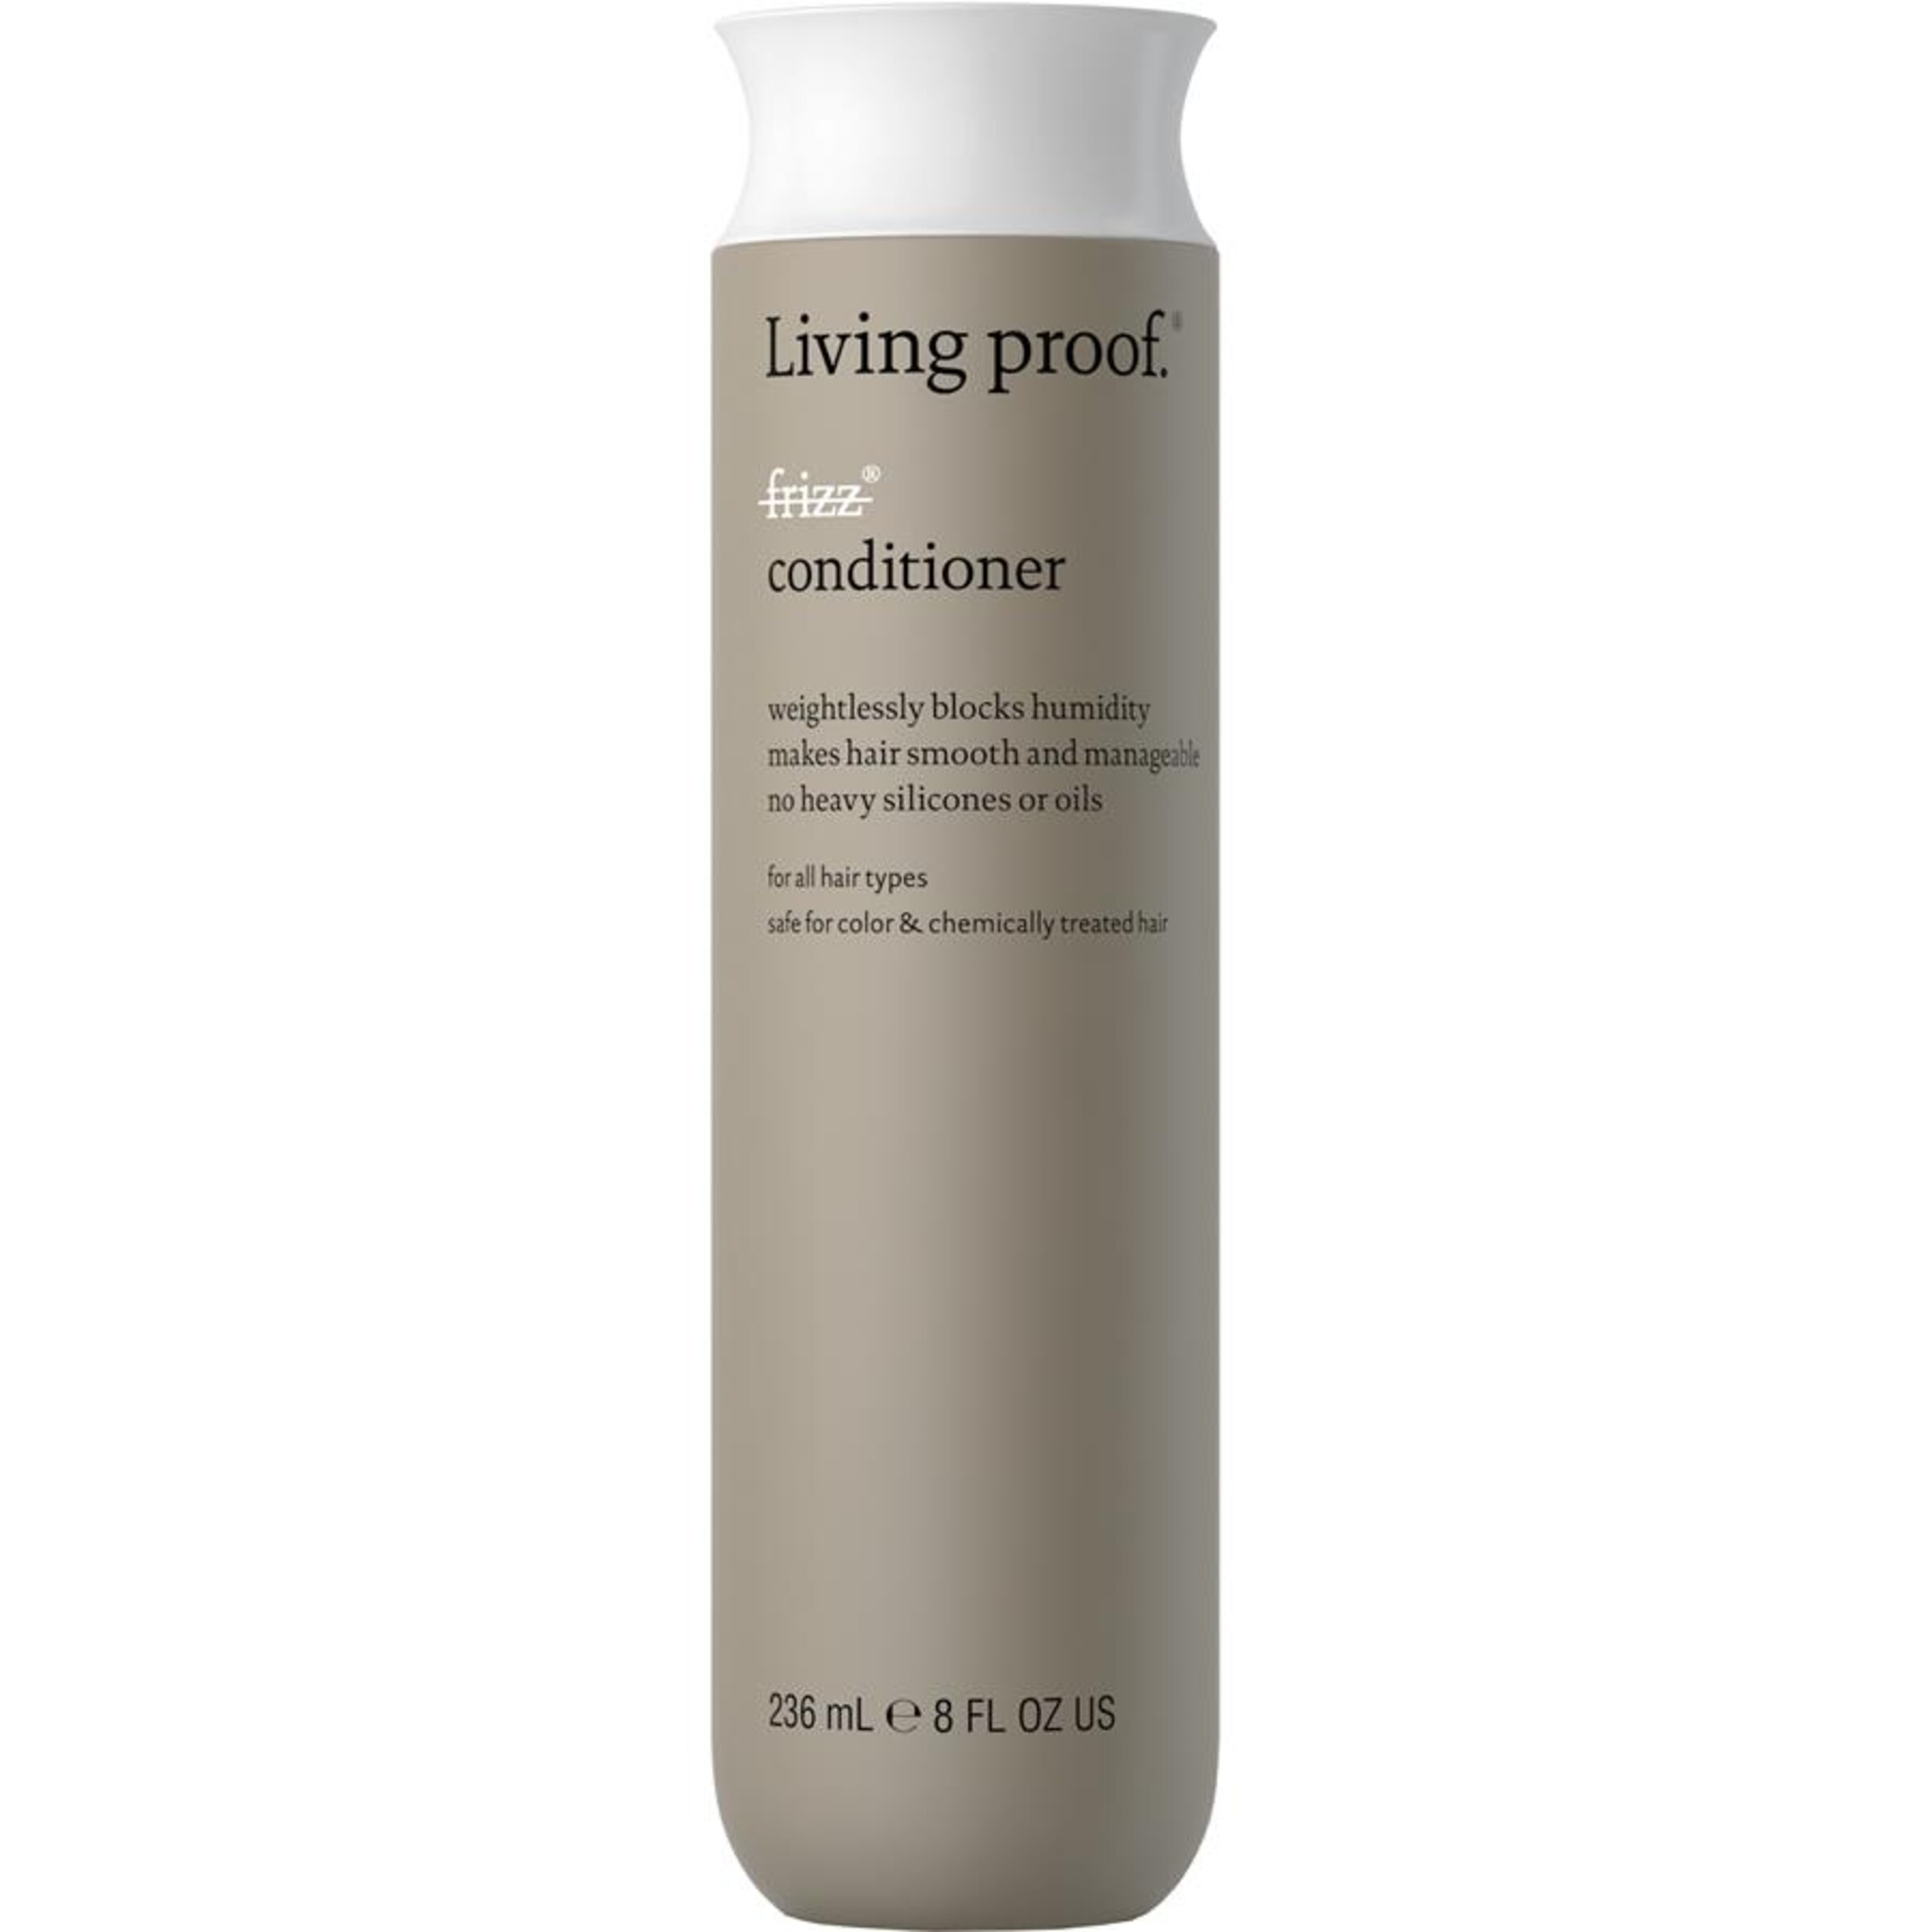 Living Proof Conditioner in 